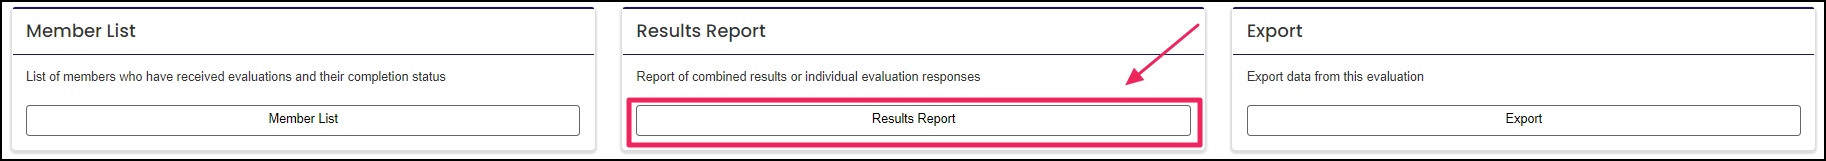 Image shows results report button.